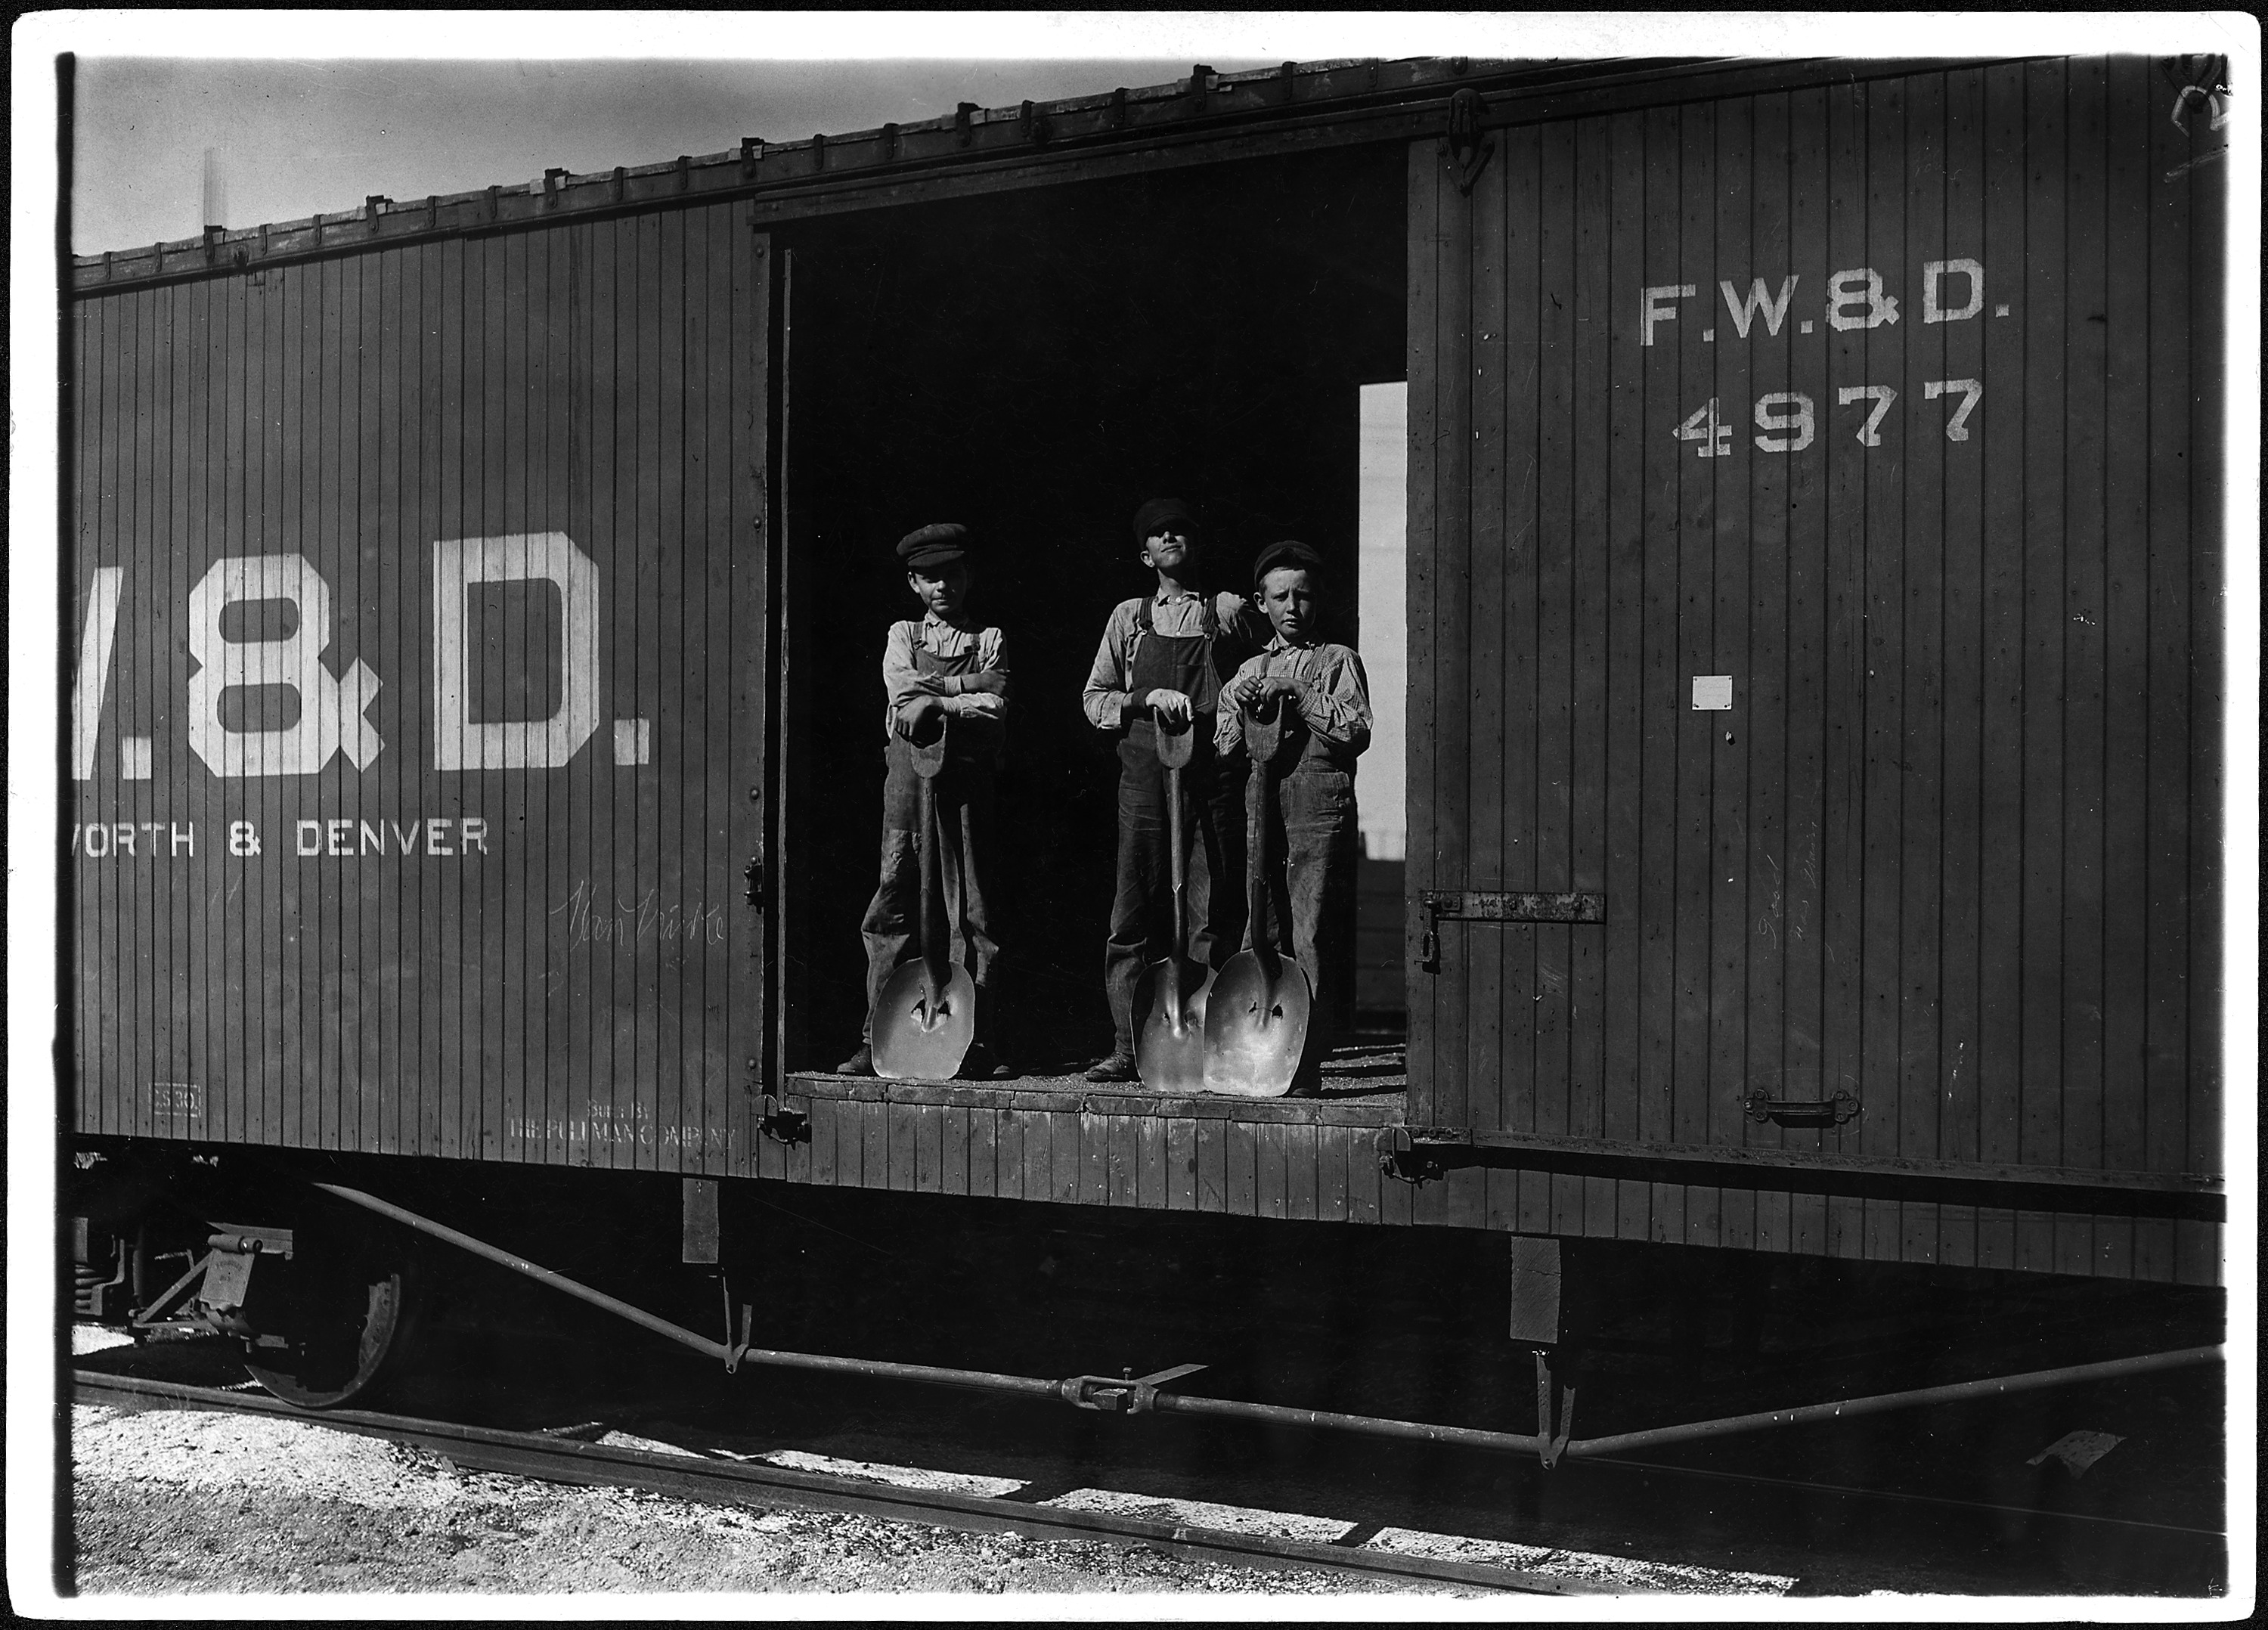 No caption. Three young boys with shovels standing in doorway of a Fort Worth ^amp, Denver train car. - NARA - 523335